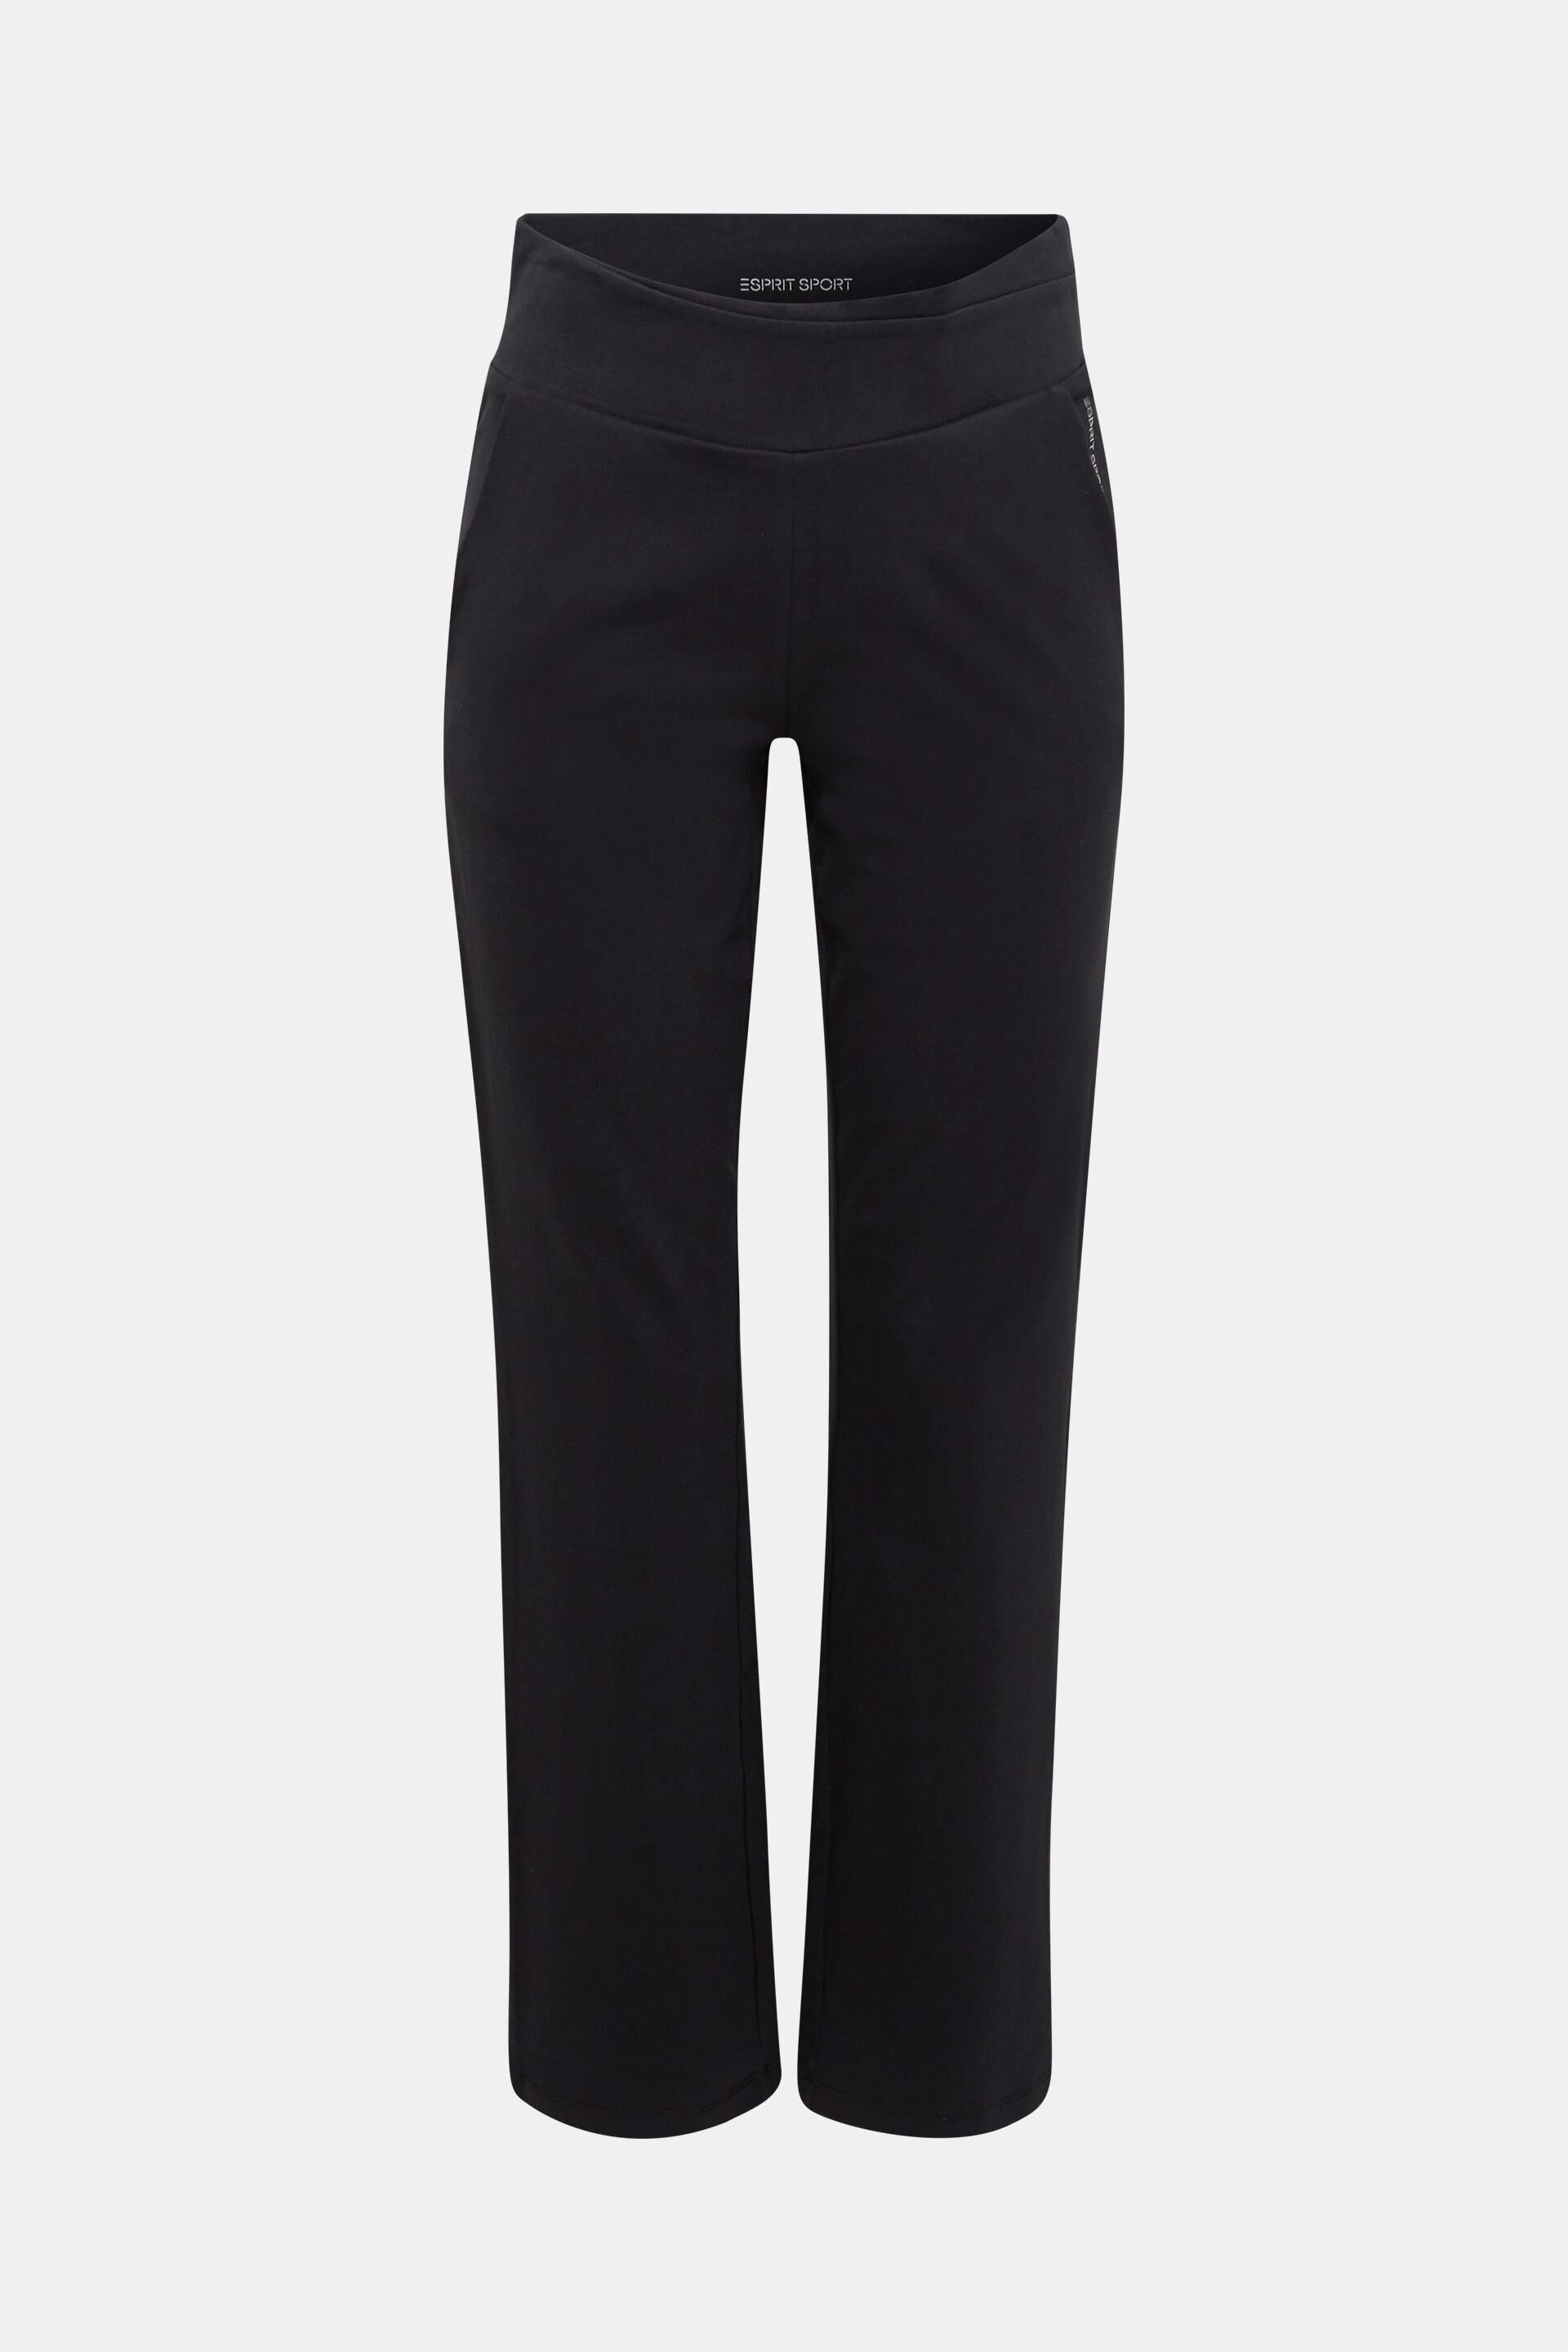 Online Shop Esprit Jersey trousers made of organic cotton